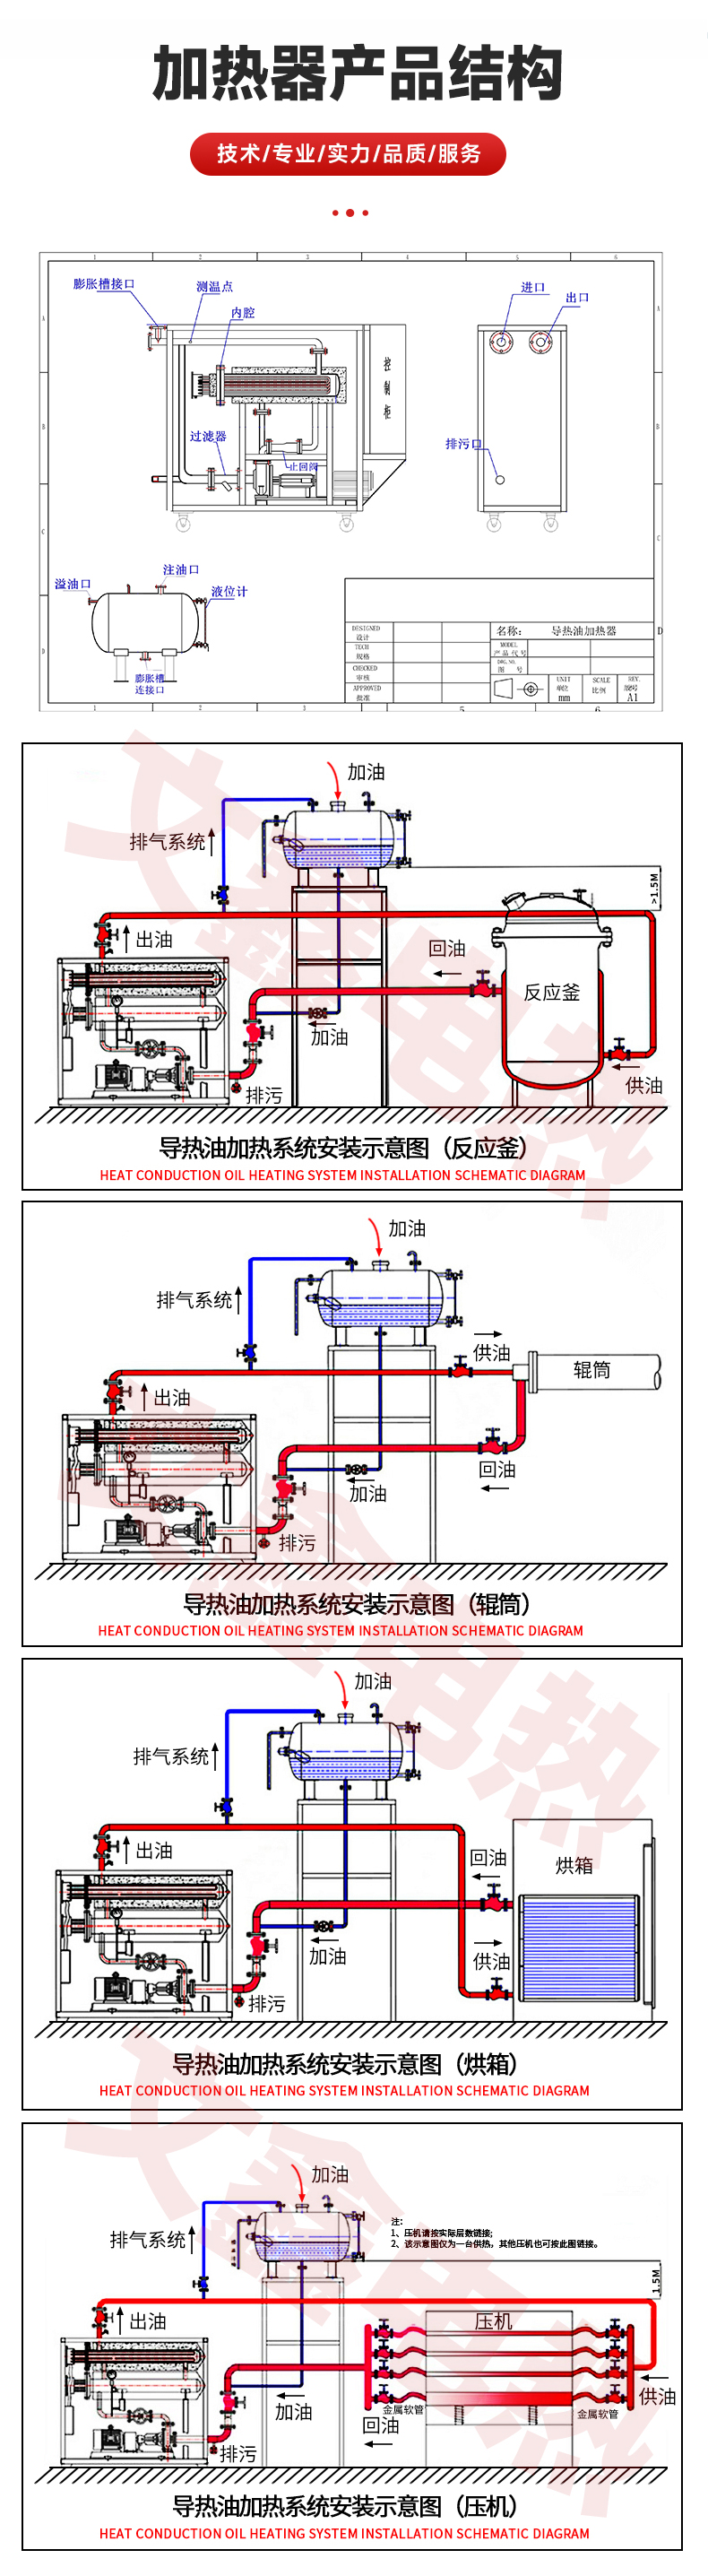 Reaction kettle heating press plate machine roller heating thermal oil furnace electric heating thermal oil heater